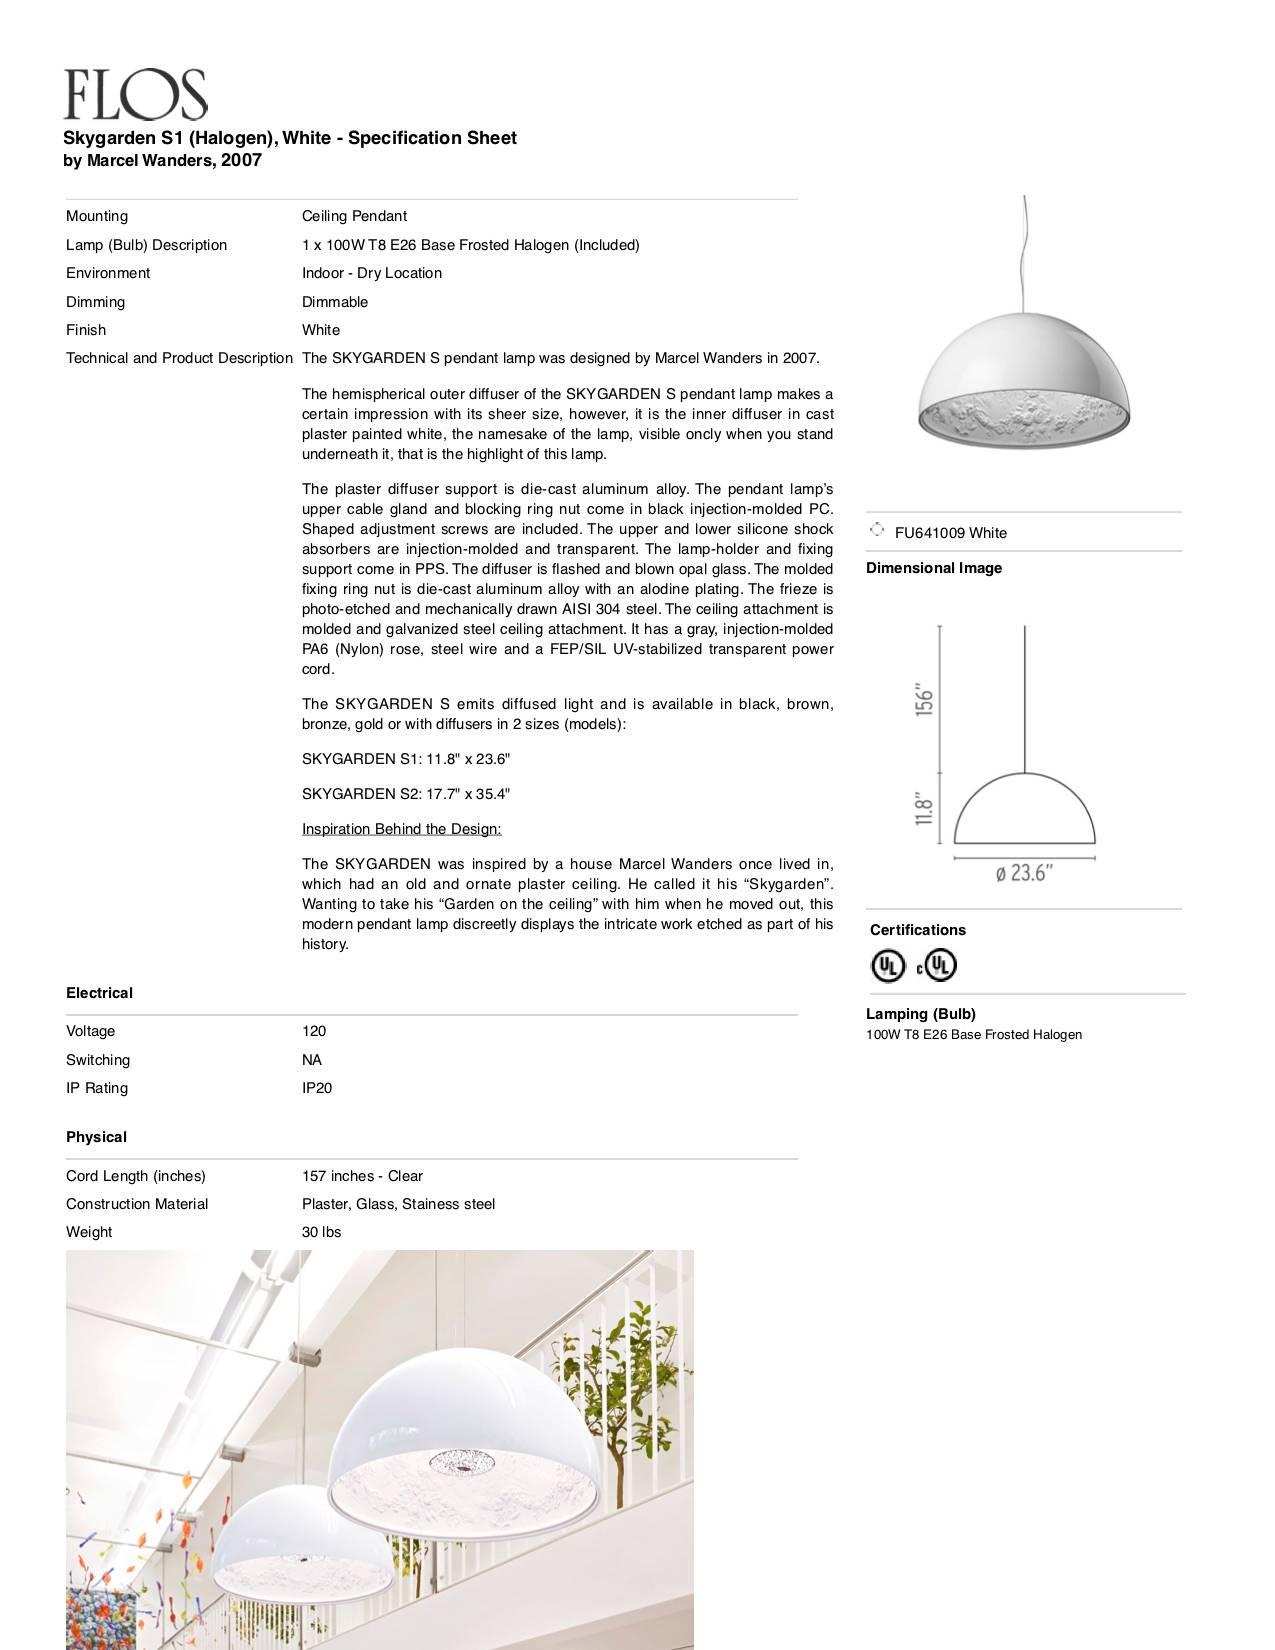 Contemporary FLOS Skygarden S1 Halogen Pendant Light in White by Marcel Wanders For Sale